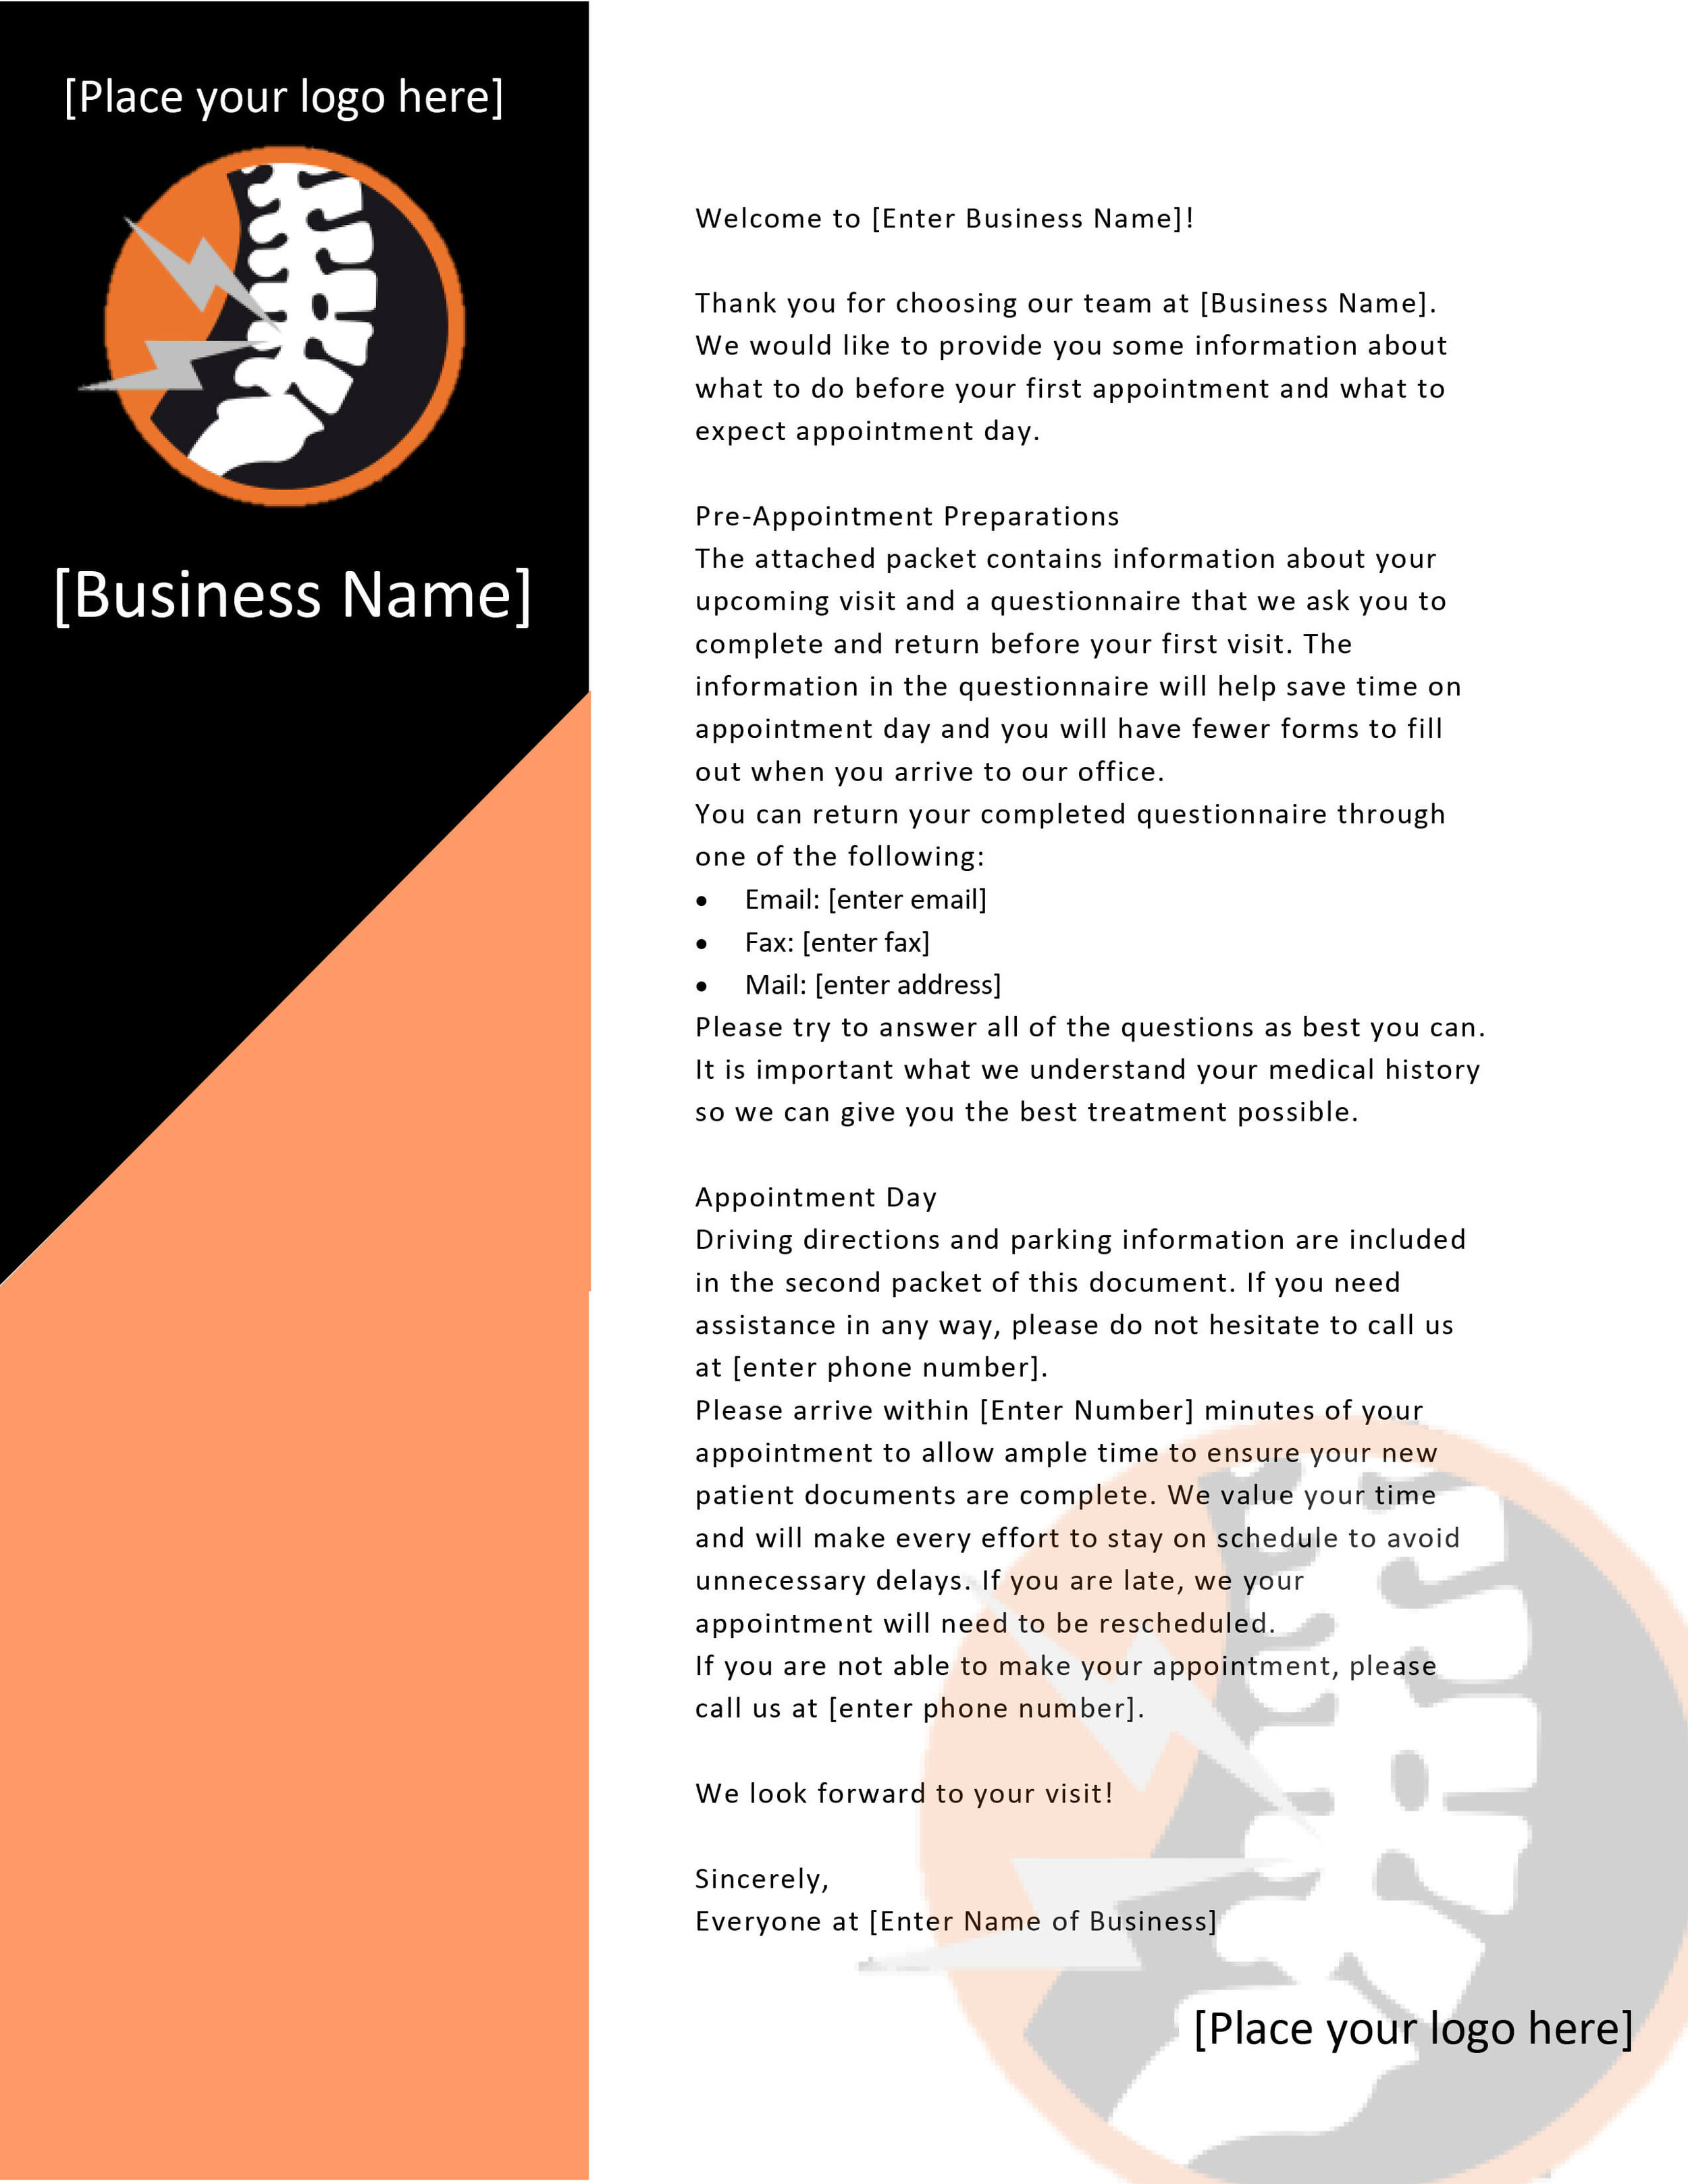 5 New Patient Welcome Letter Templates for Chiropractors-4.jpg